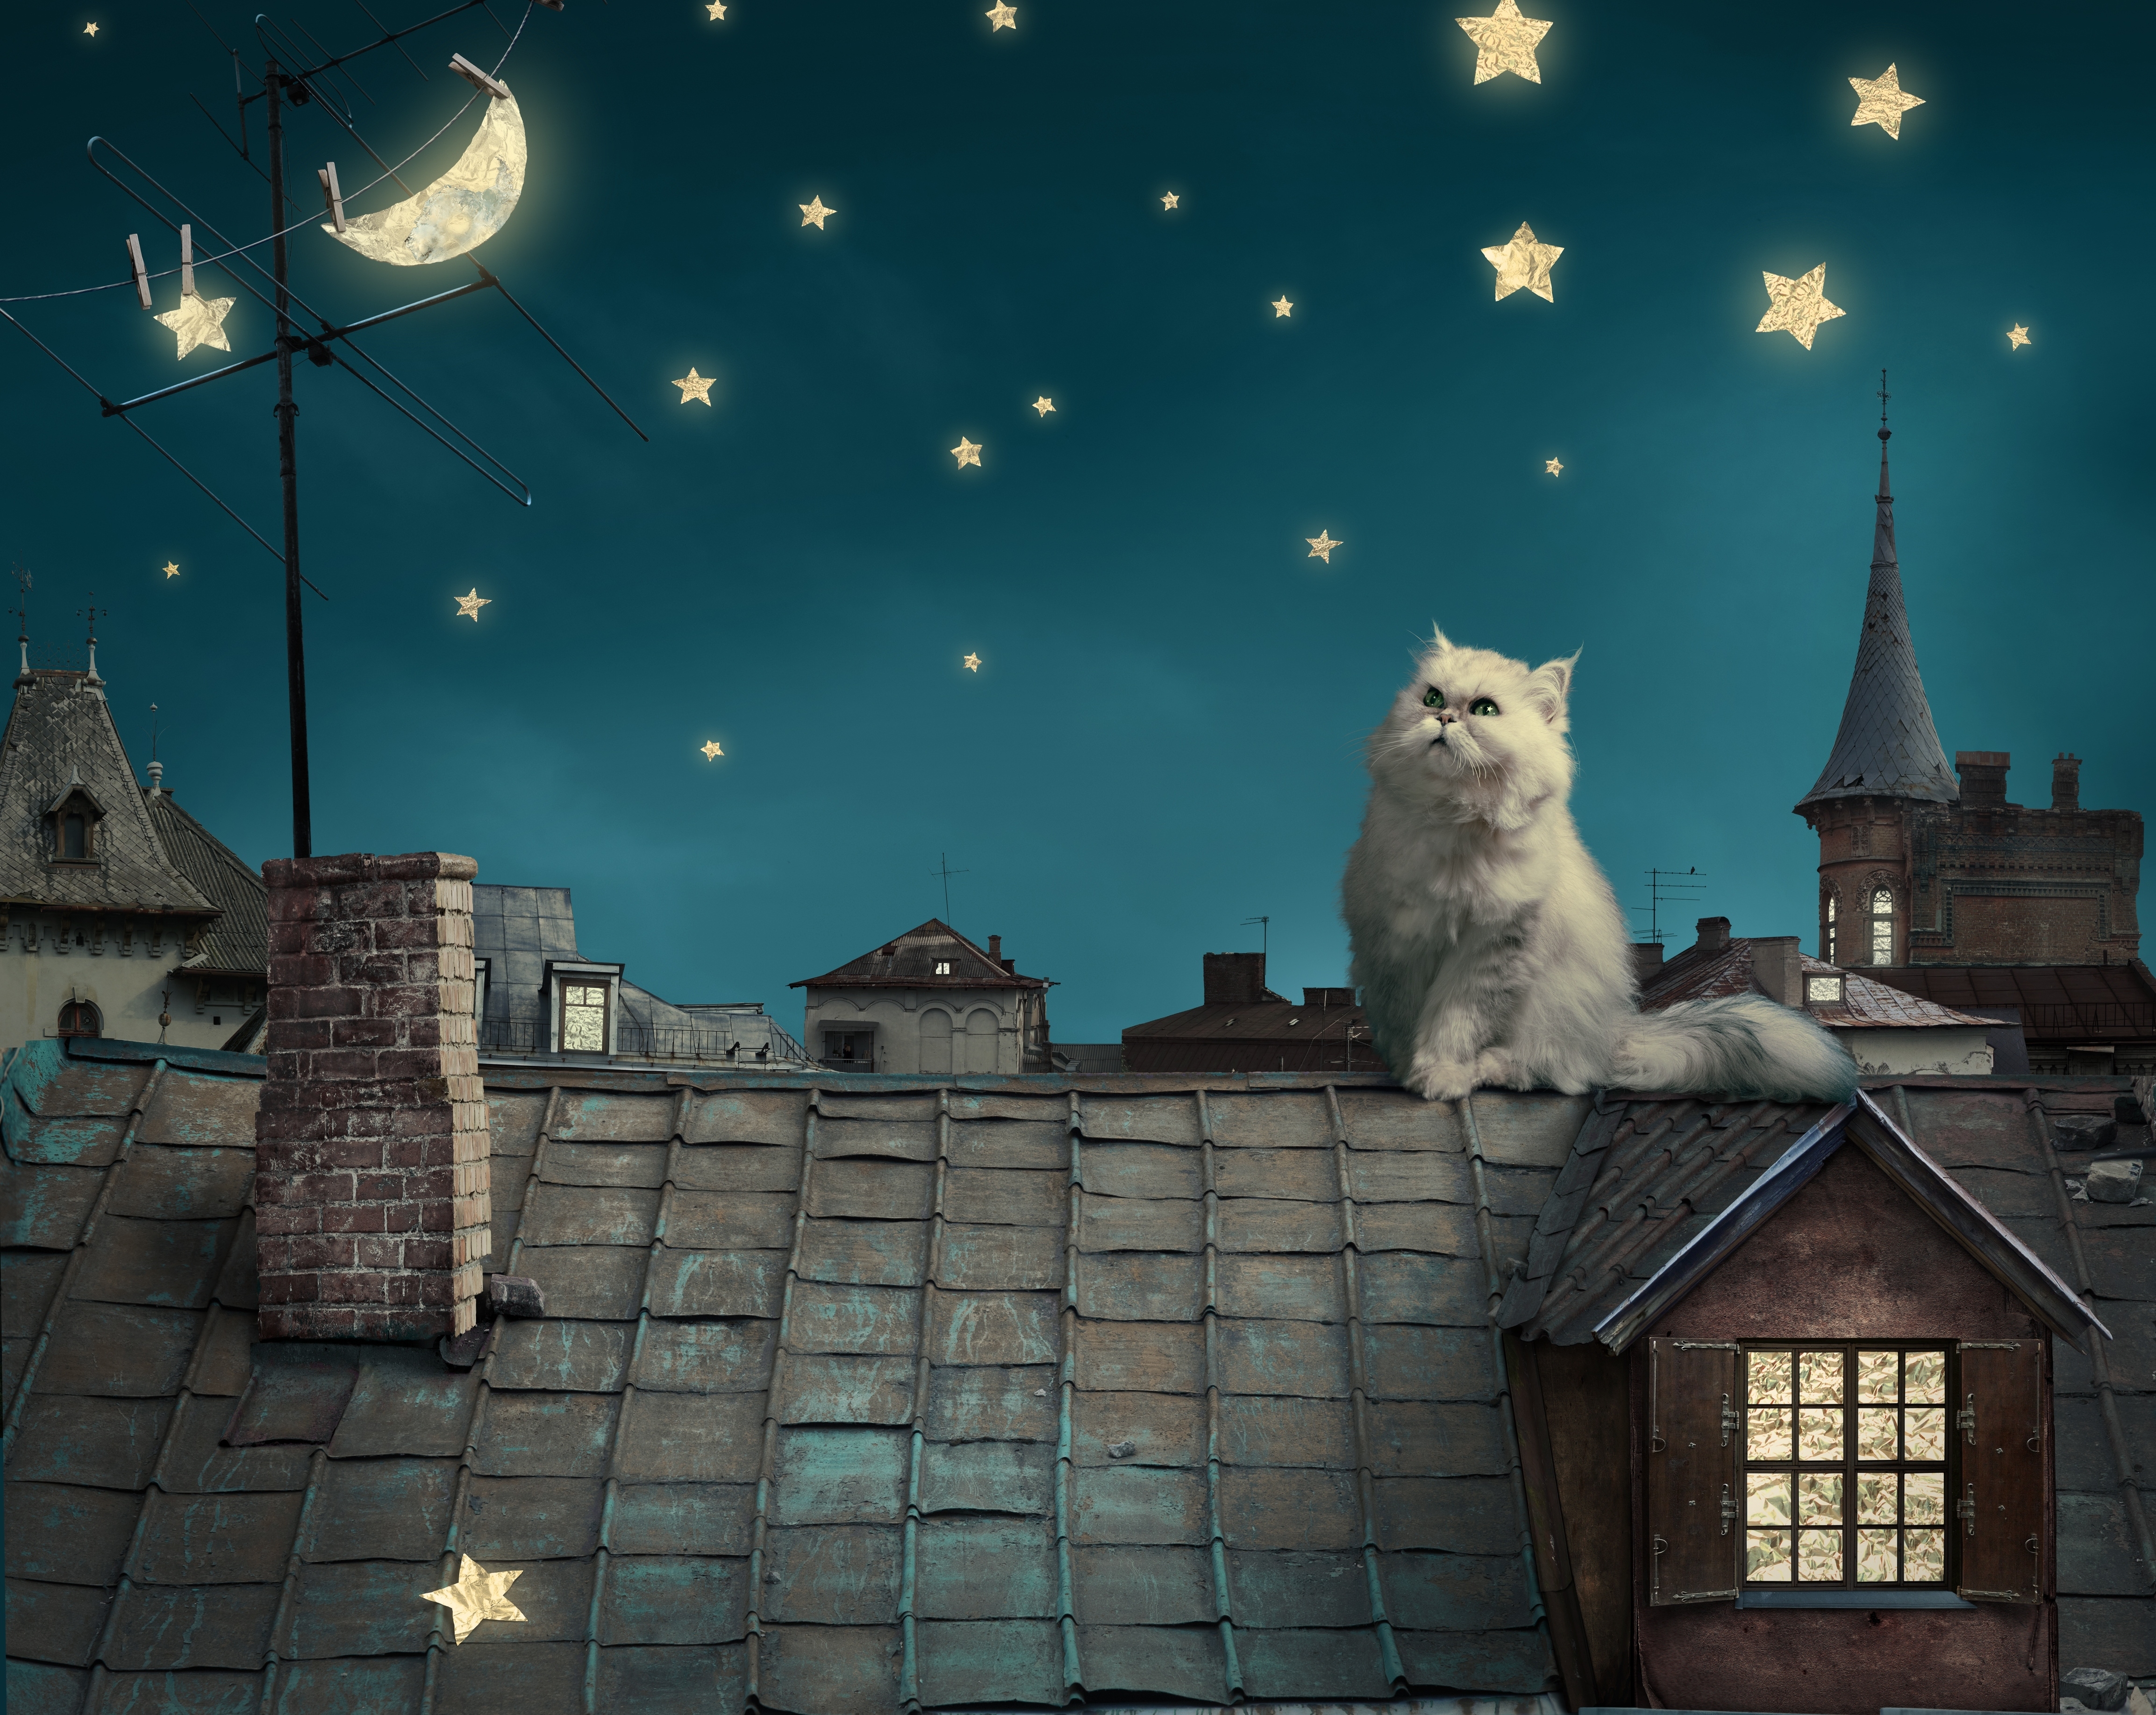 Download background fantasy, animals, kitty, stars, houses, sky, night, moon, fairy tale, kitten, roof, roofs, story, persian white cat